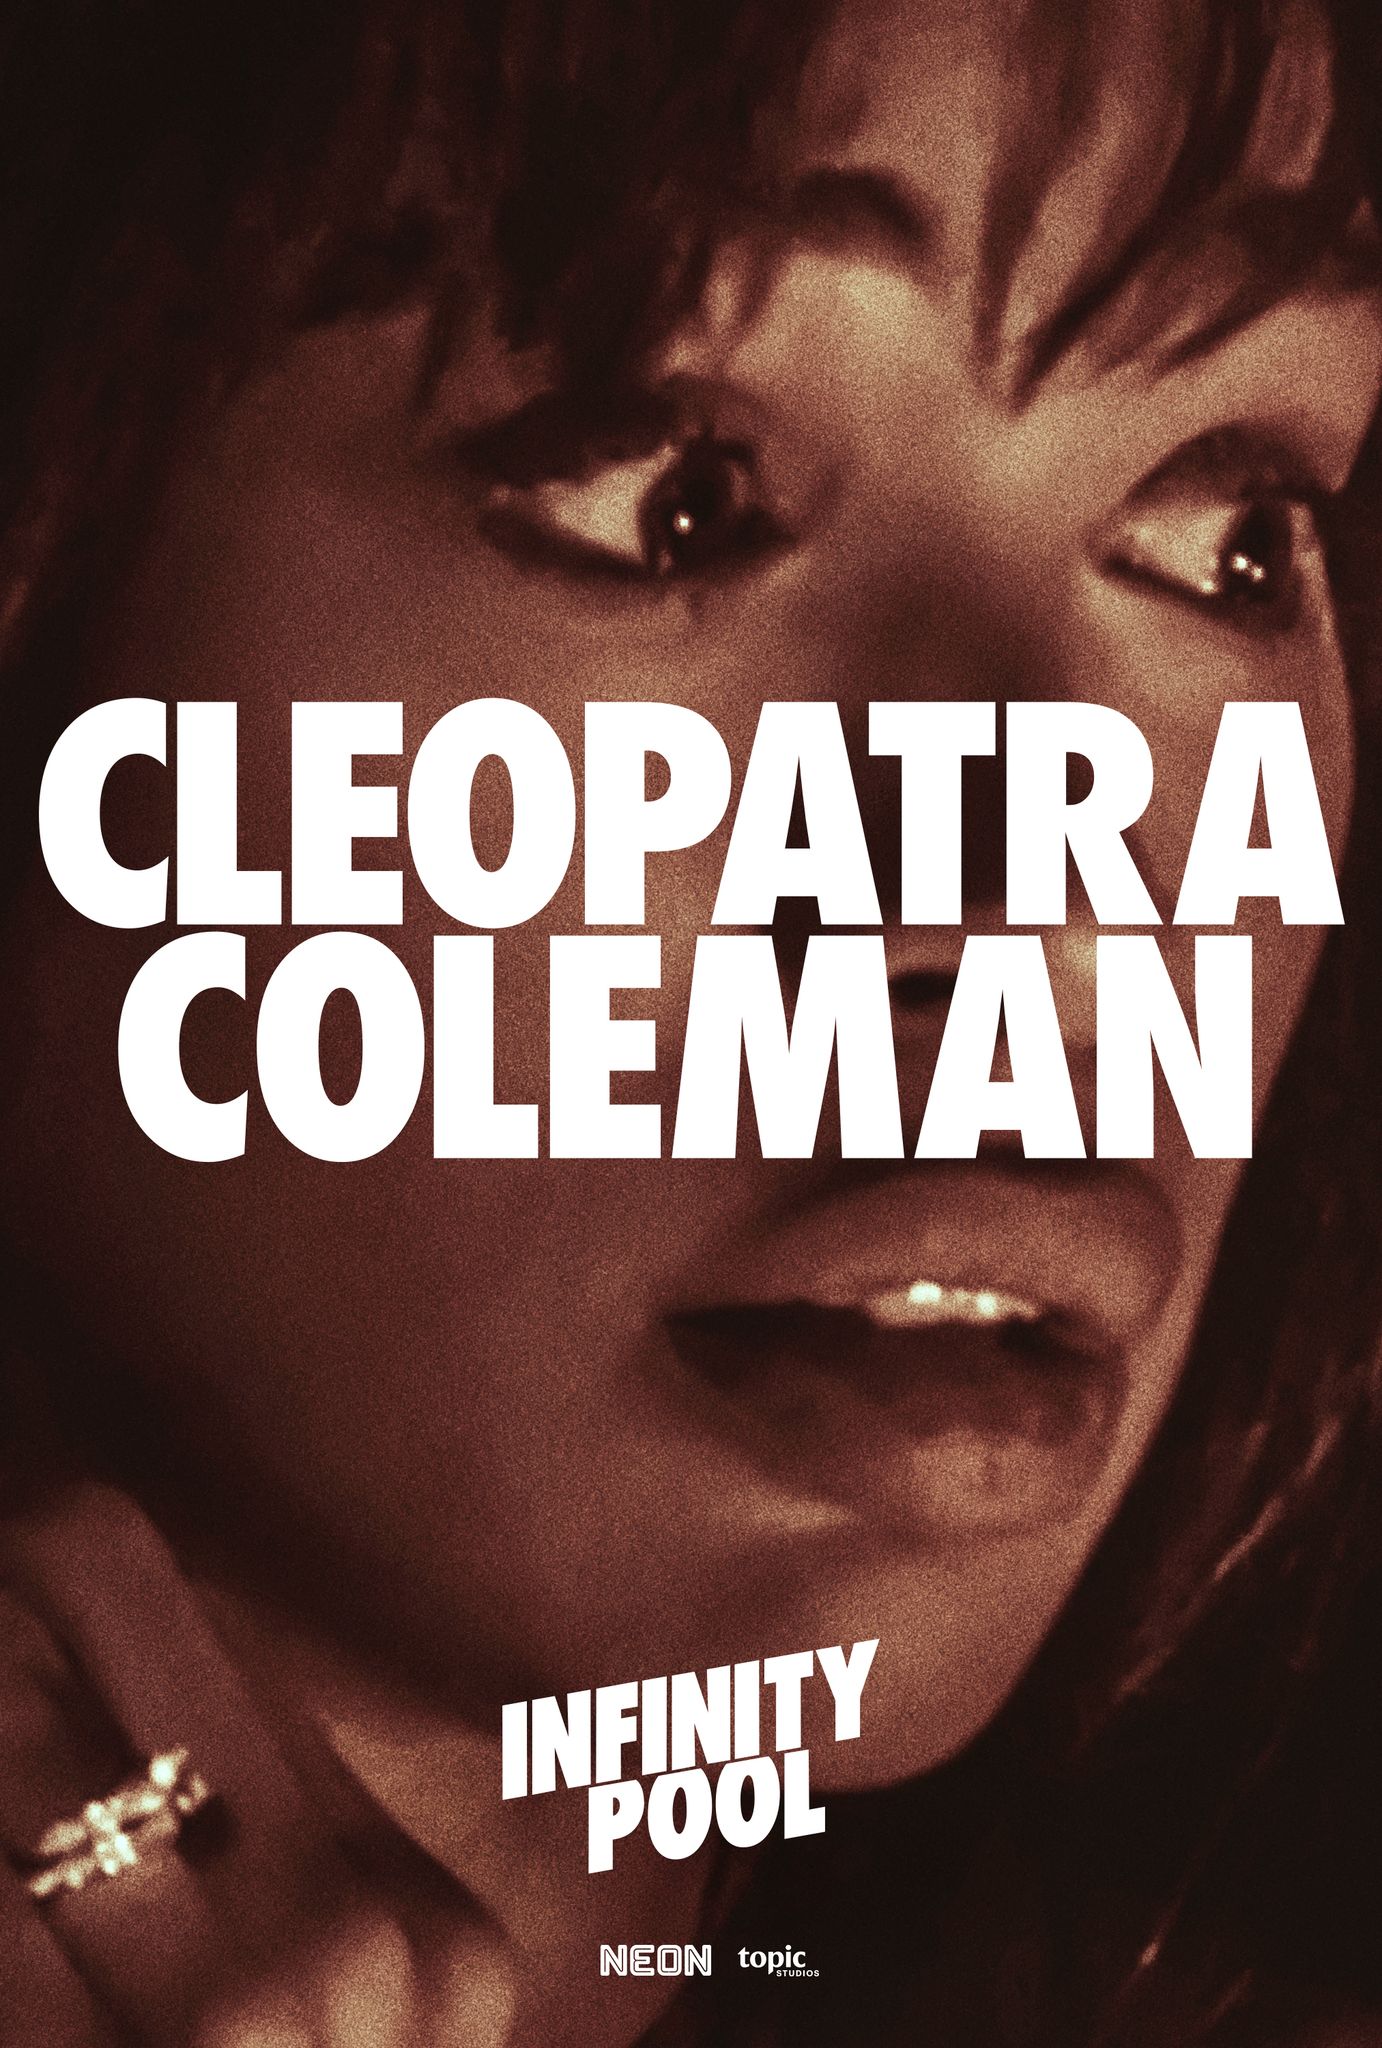 cleopatra-coleman-infinity-pool-poster